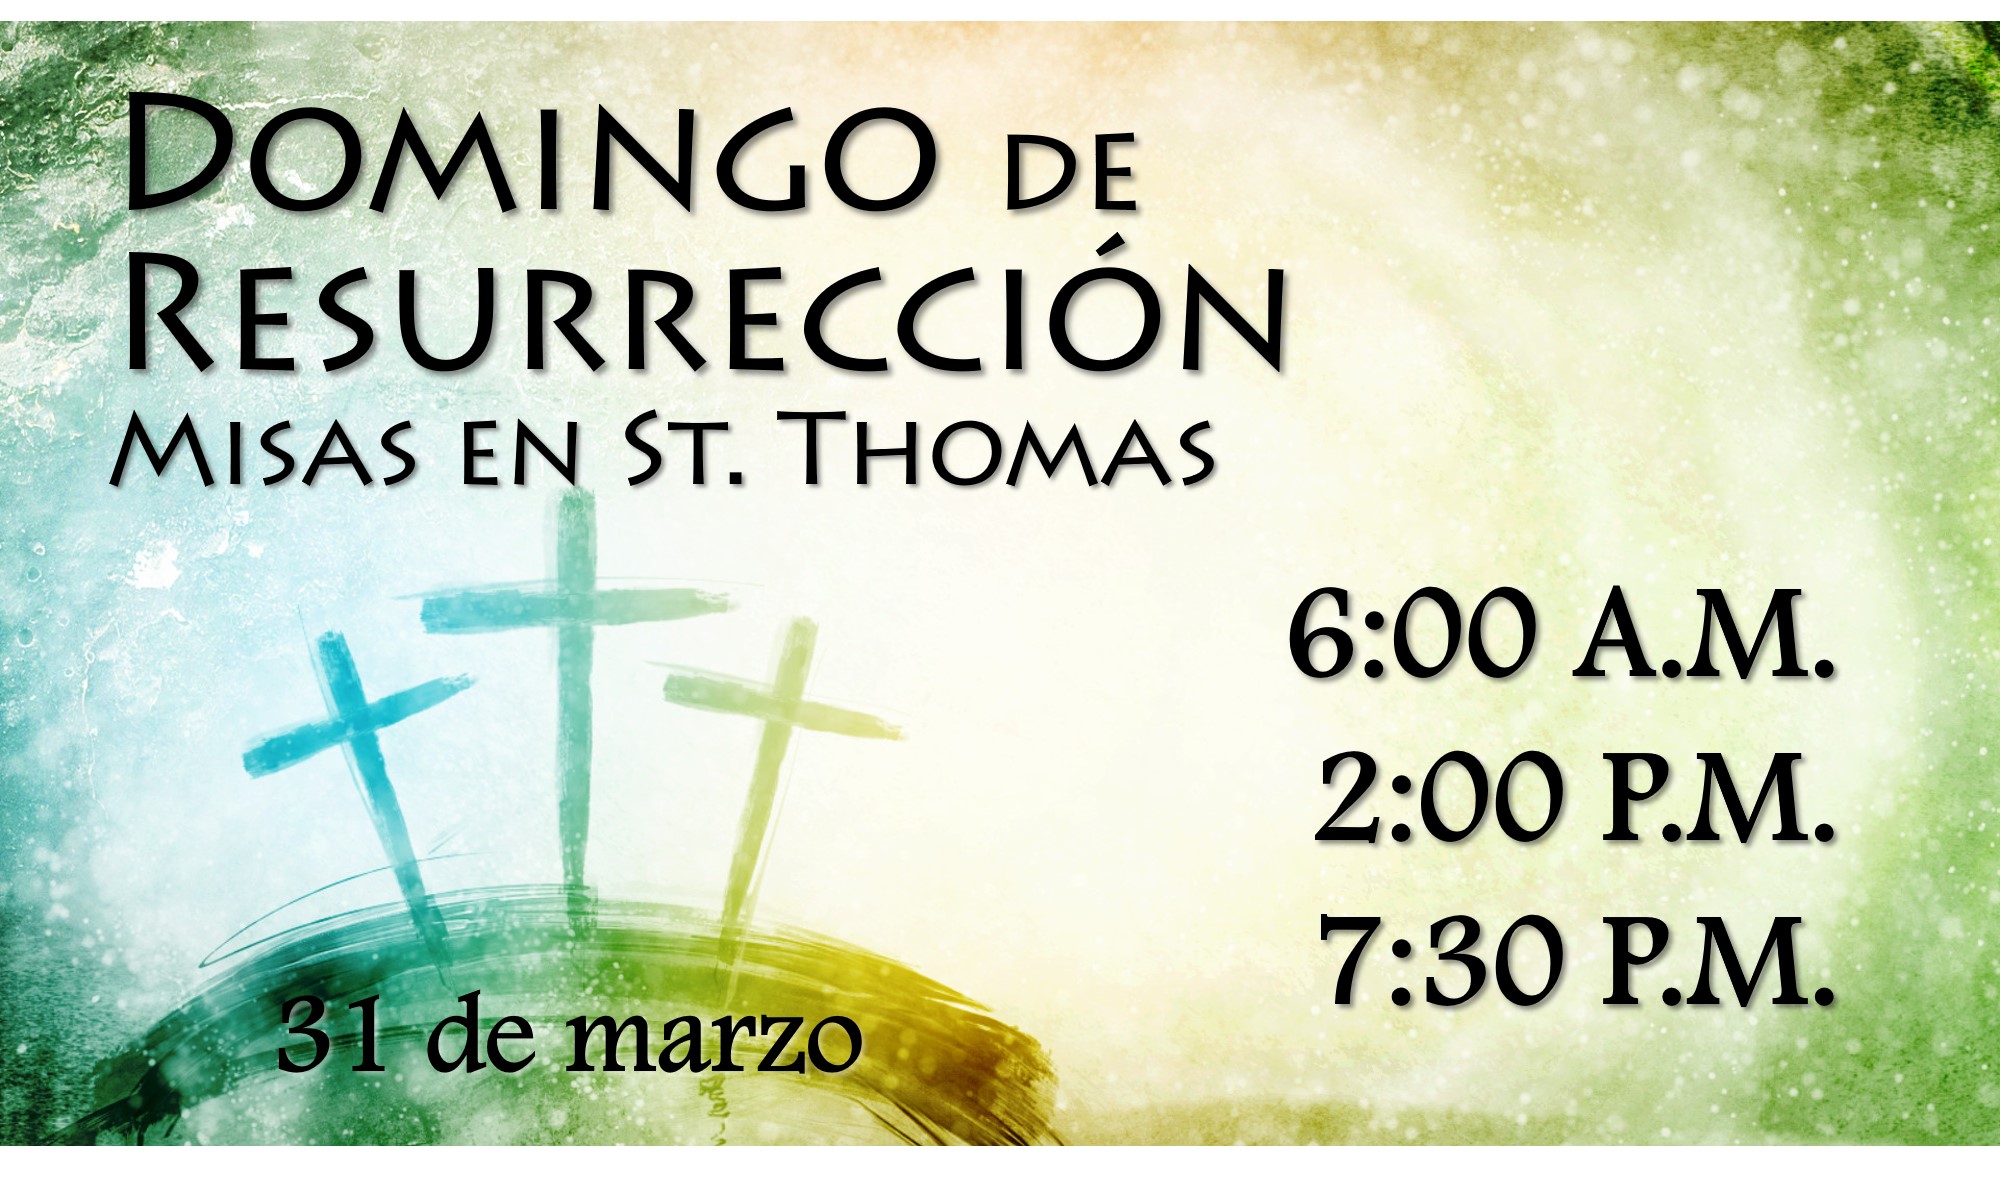 Easter Sunday Schedule - Spanish